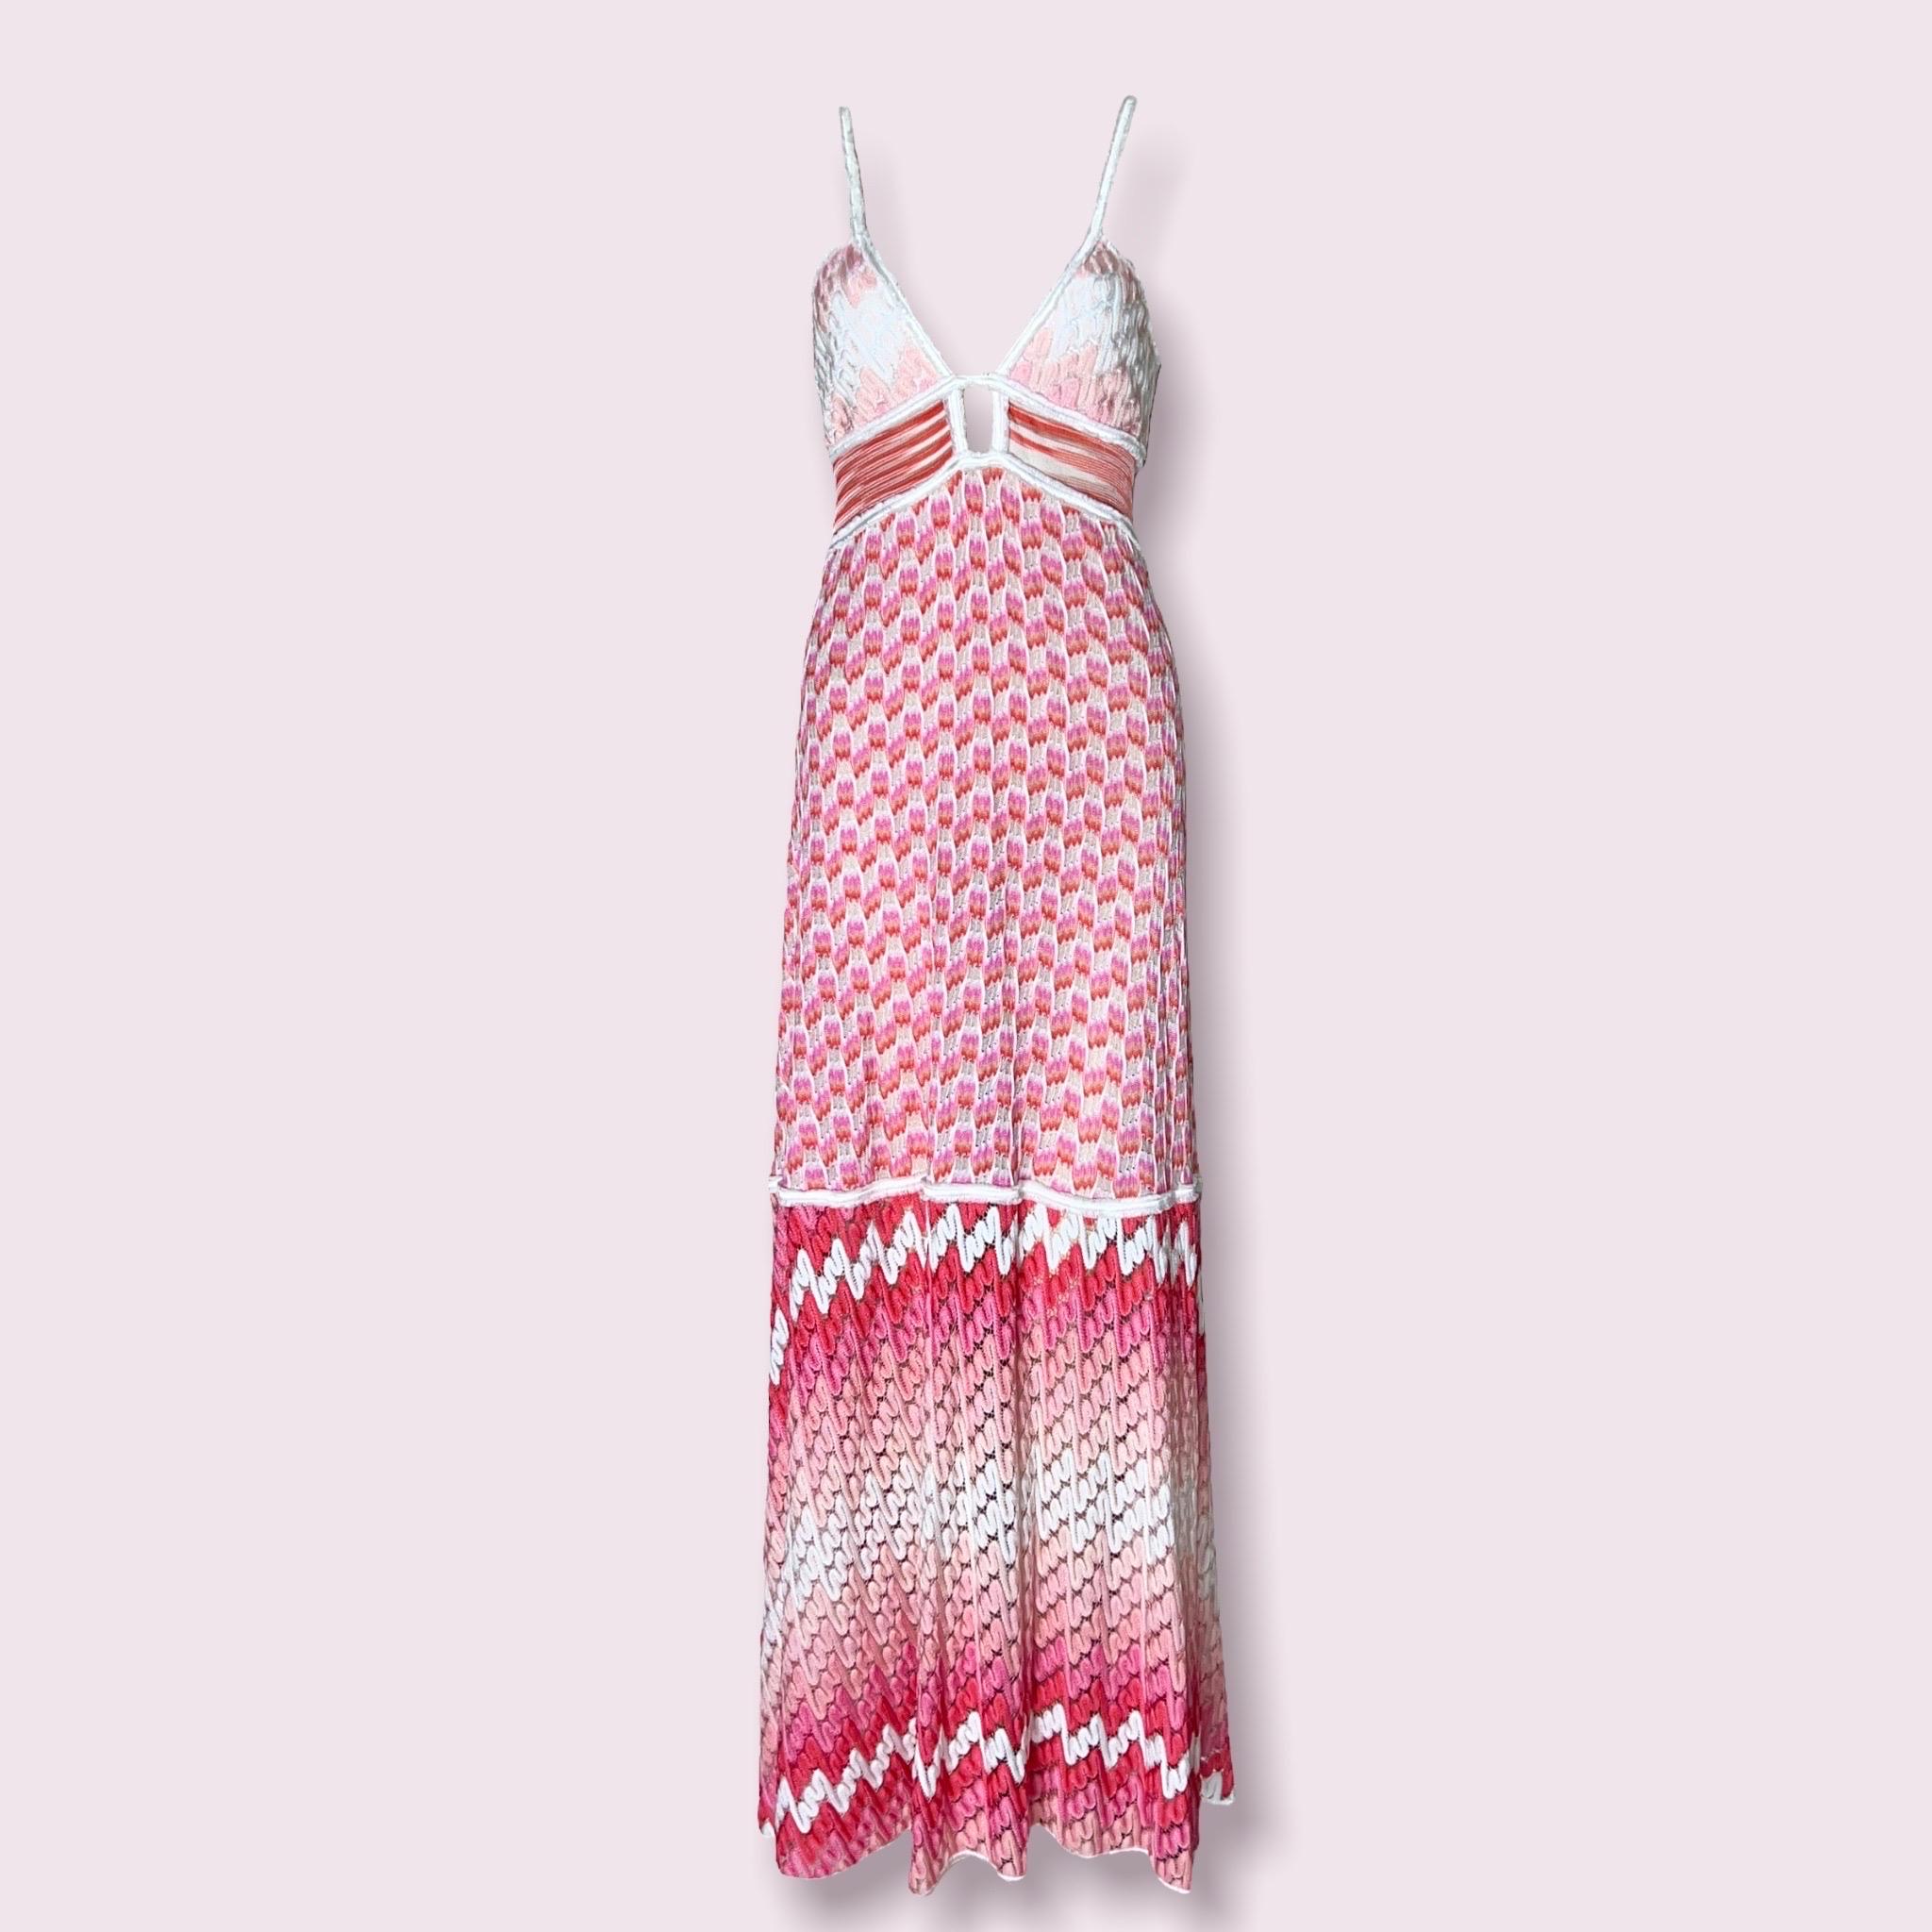 UNIQUE LUXURIOUS MISSONI ORANGE LABEL MAXI DRESS GOWN

 A CLASSIC MISSONI SIGNATURE PIECE THAT WILL LAST YOU FOR YEARS

DETAILS:

Stunning maxi dress by MISSONI
Beautiful shades of pink
White fringed shoulder straps and details
Sexy peek-a-boo